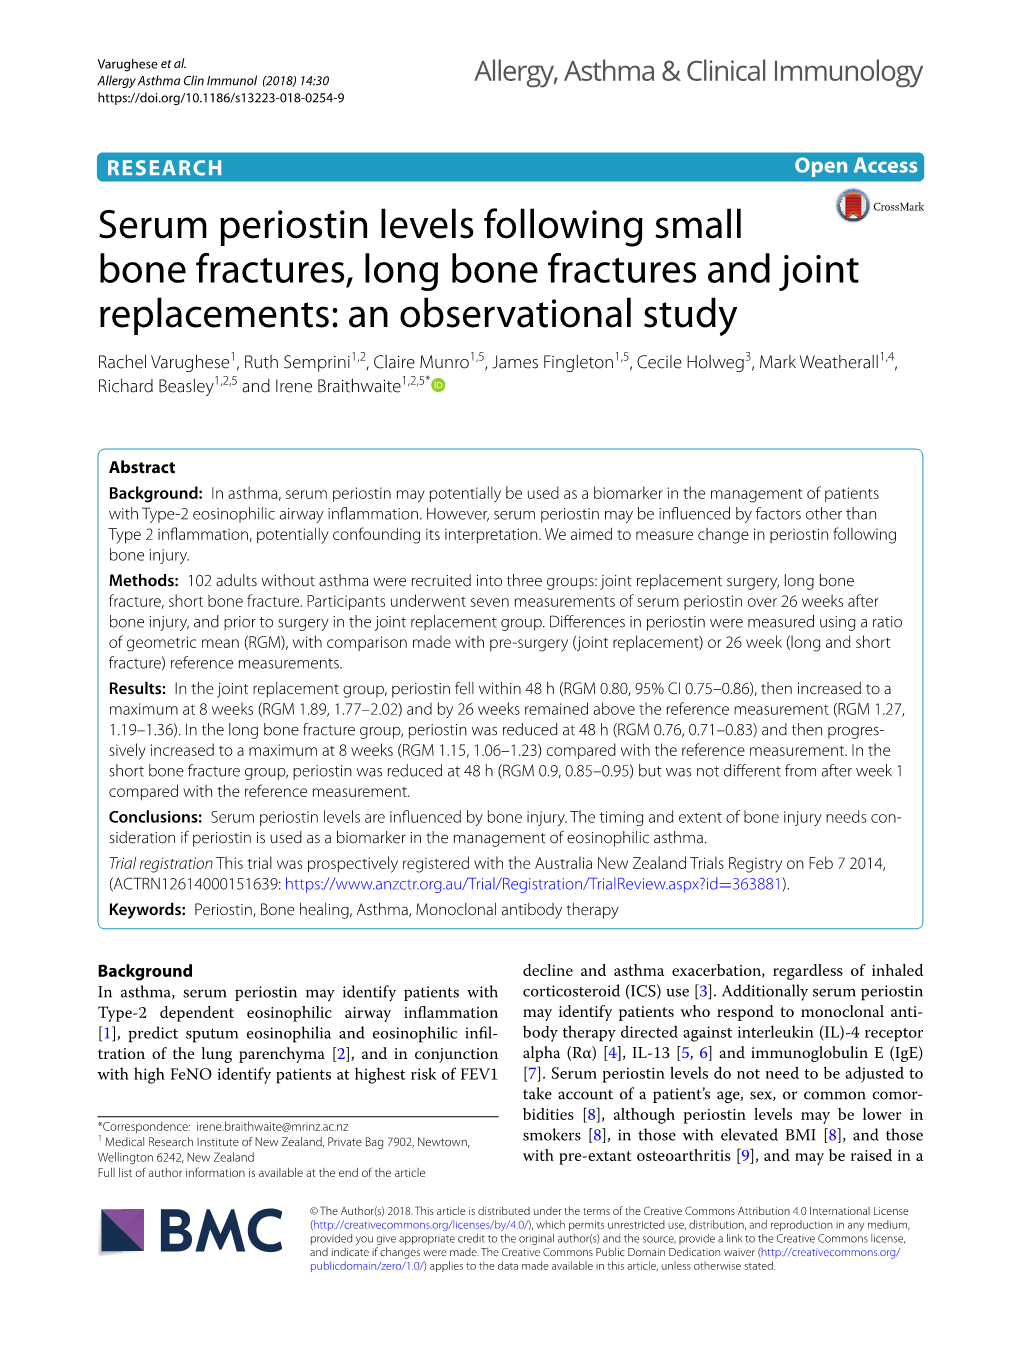 Serum Periostin Levels Following Small Bone Fractures, Long Bone Fractures